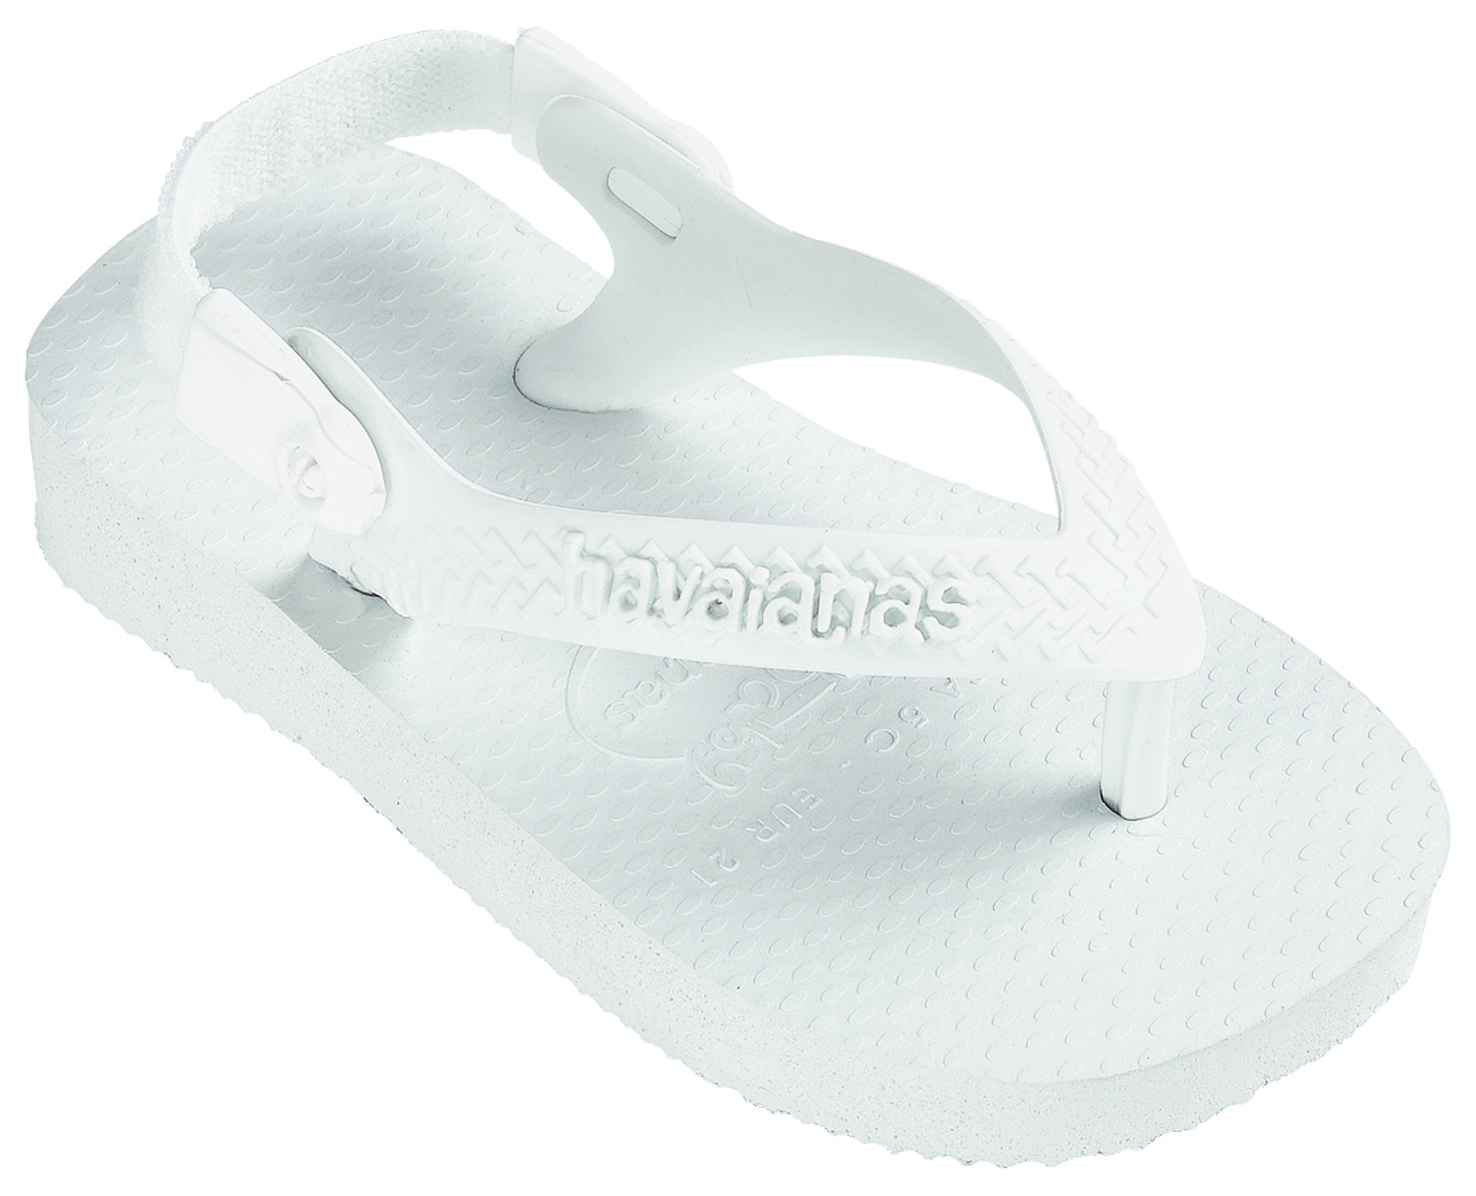  Havaianas  Image Gallery Thedbaexpert s Blog